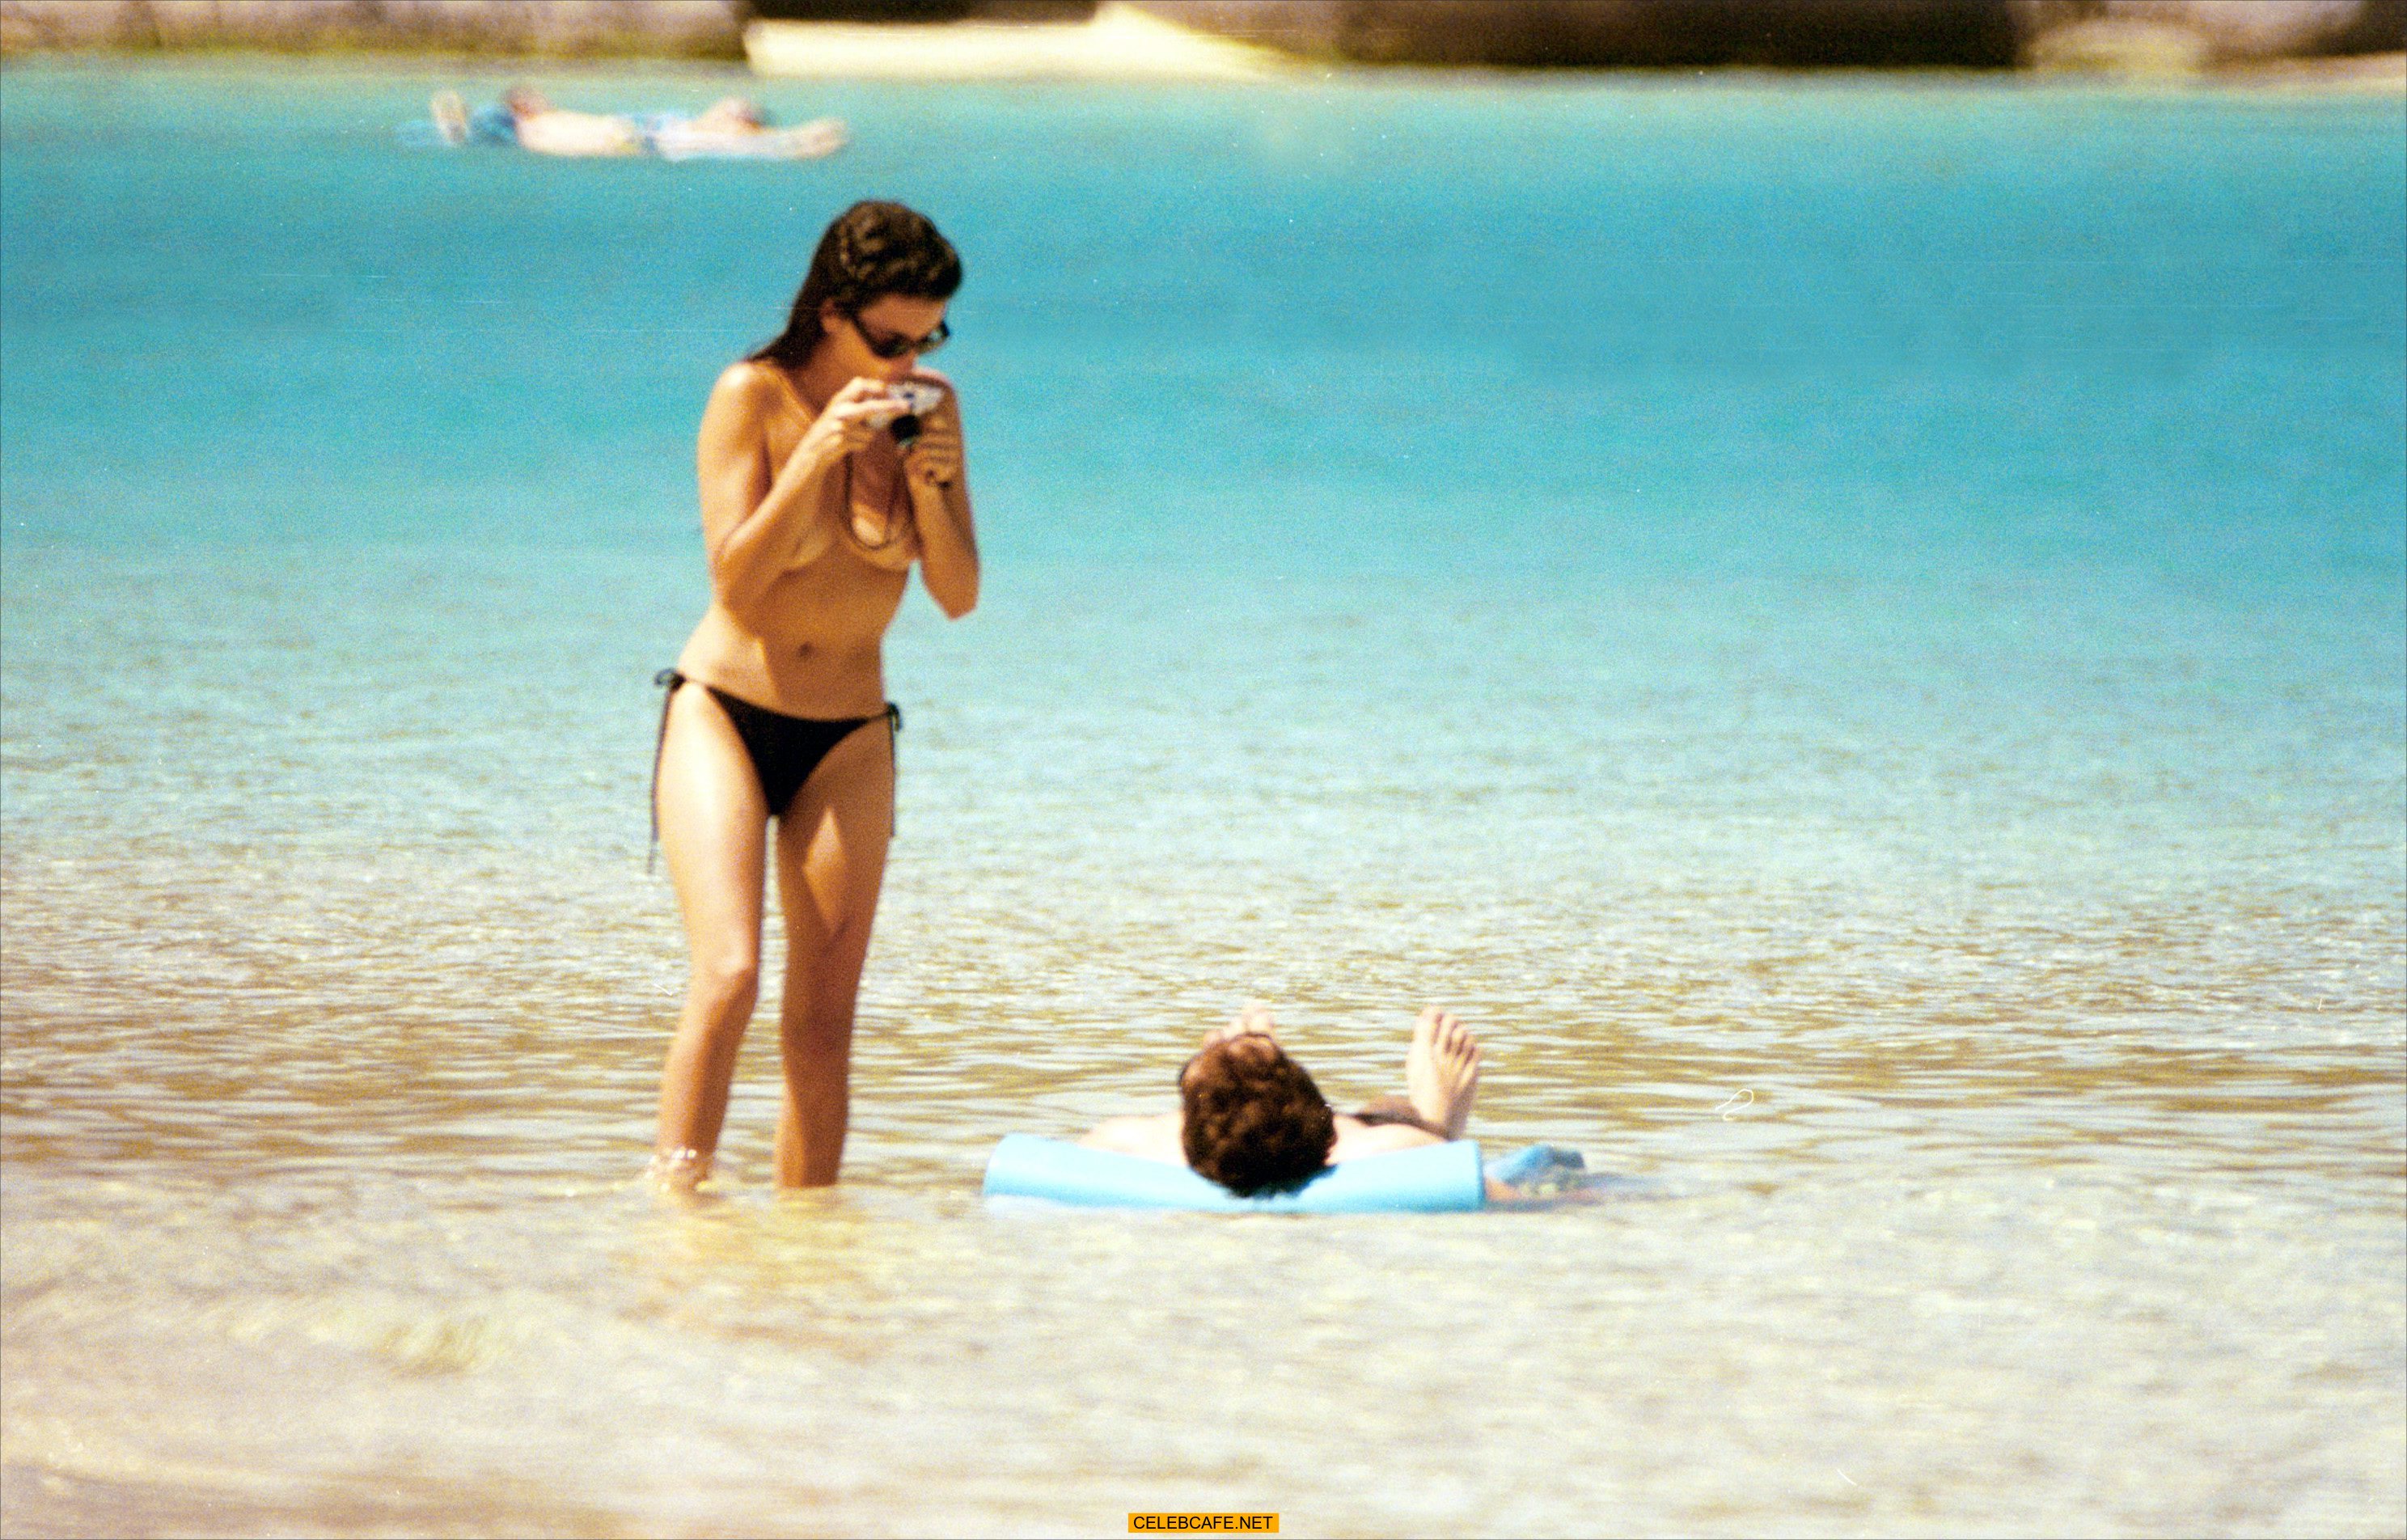 Spanish actress Penelope Cruz topless at a beach with camera in Virgin Isla...